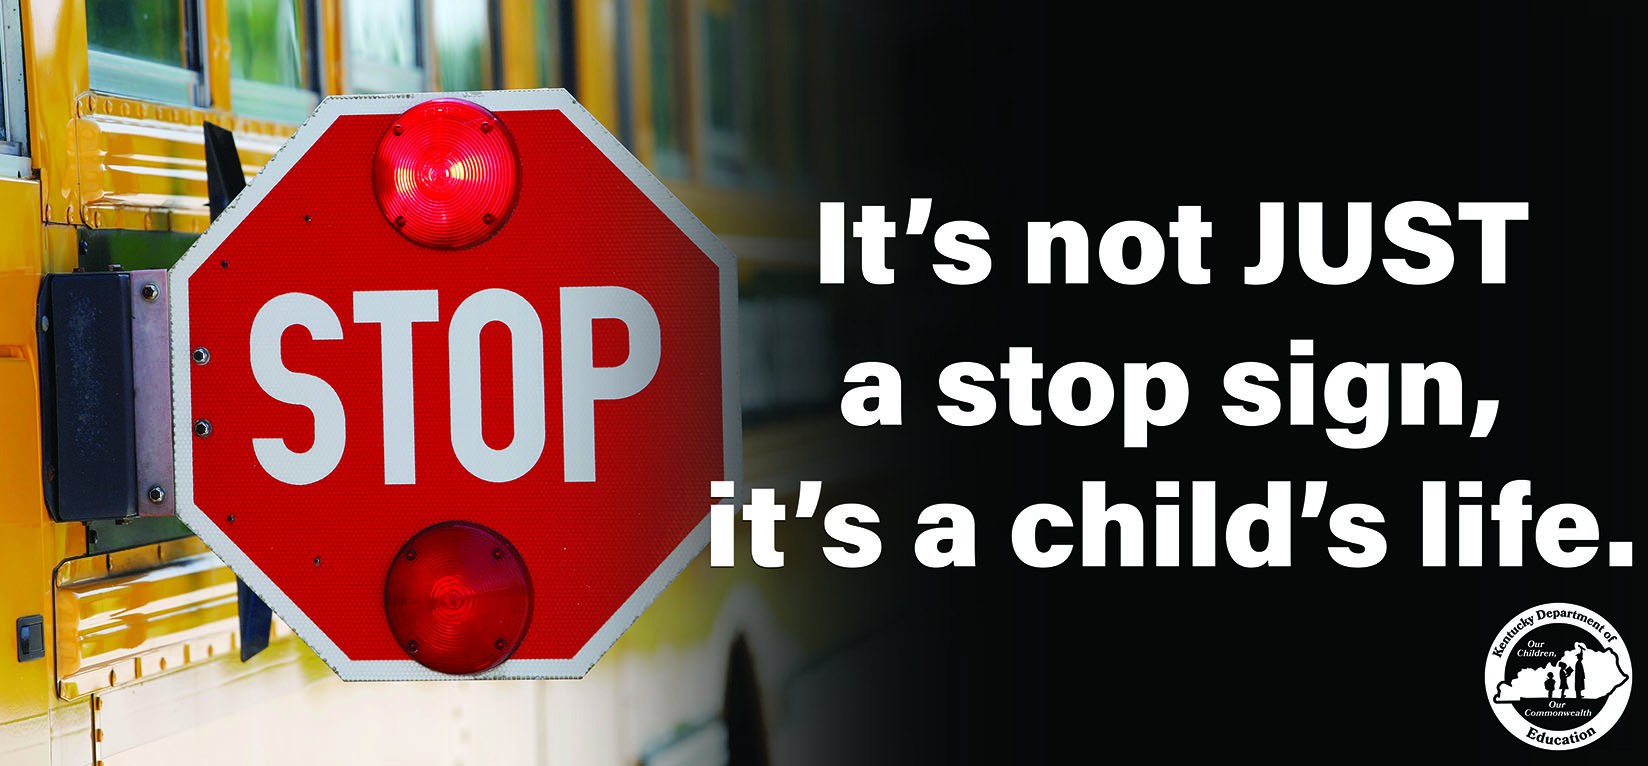 This is a picture of a stopped school bus with the stop arm extended. Next to the stop sign reads, "It's not JUST a stop sign, it's a child's life."